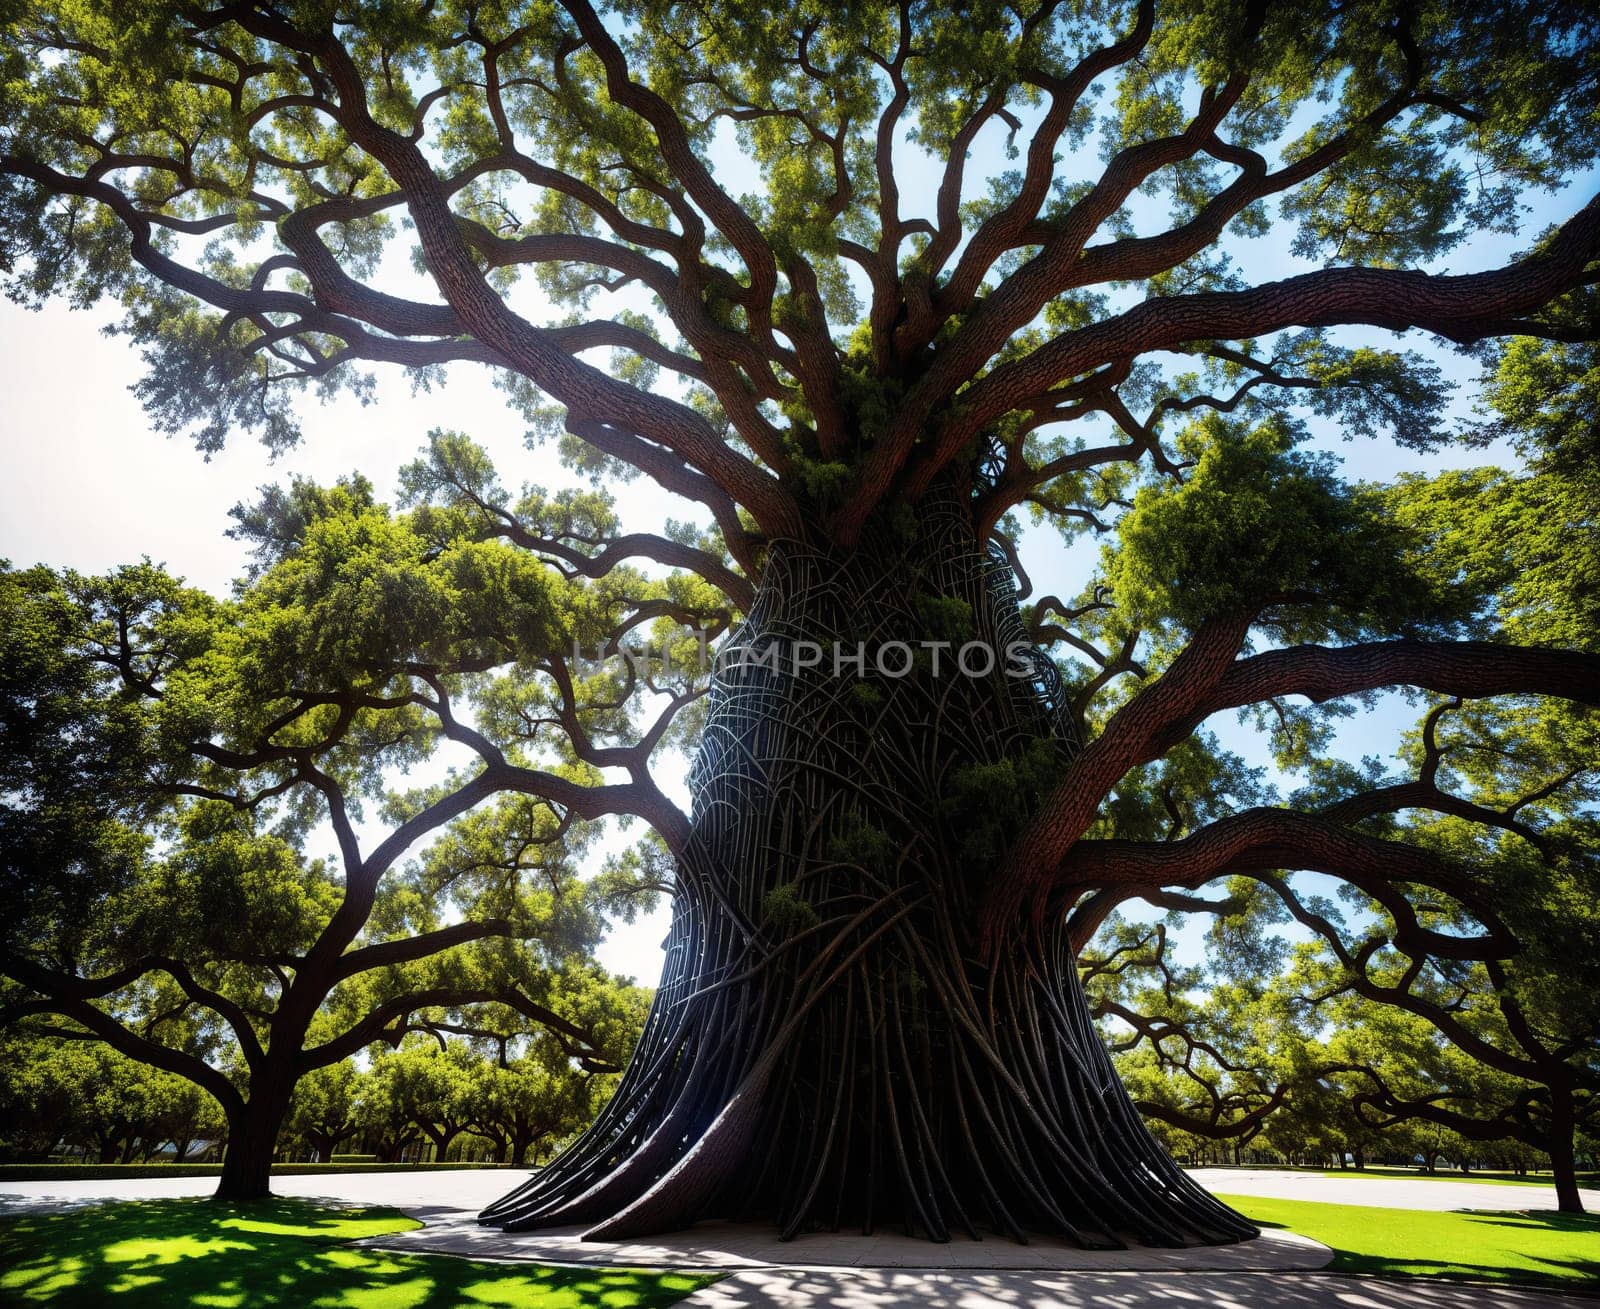 The image shows a large, ancient oak tree with gnarled and twisted branches that stretch up towards the sky, creating a dramatic and mysterious atmosphere.